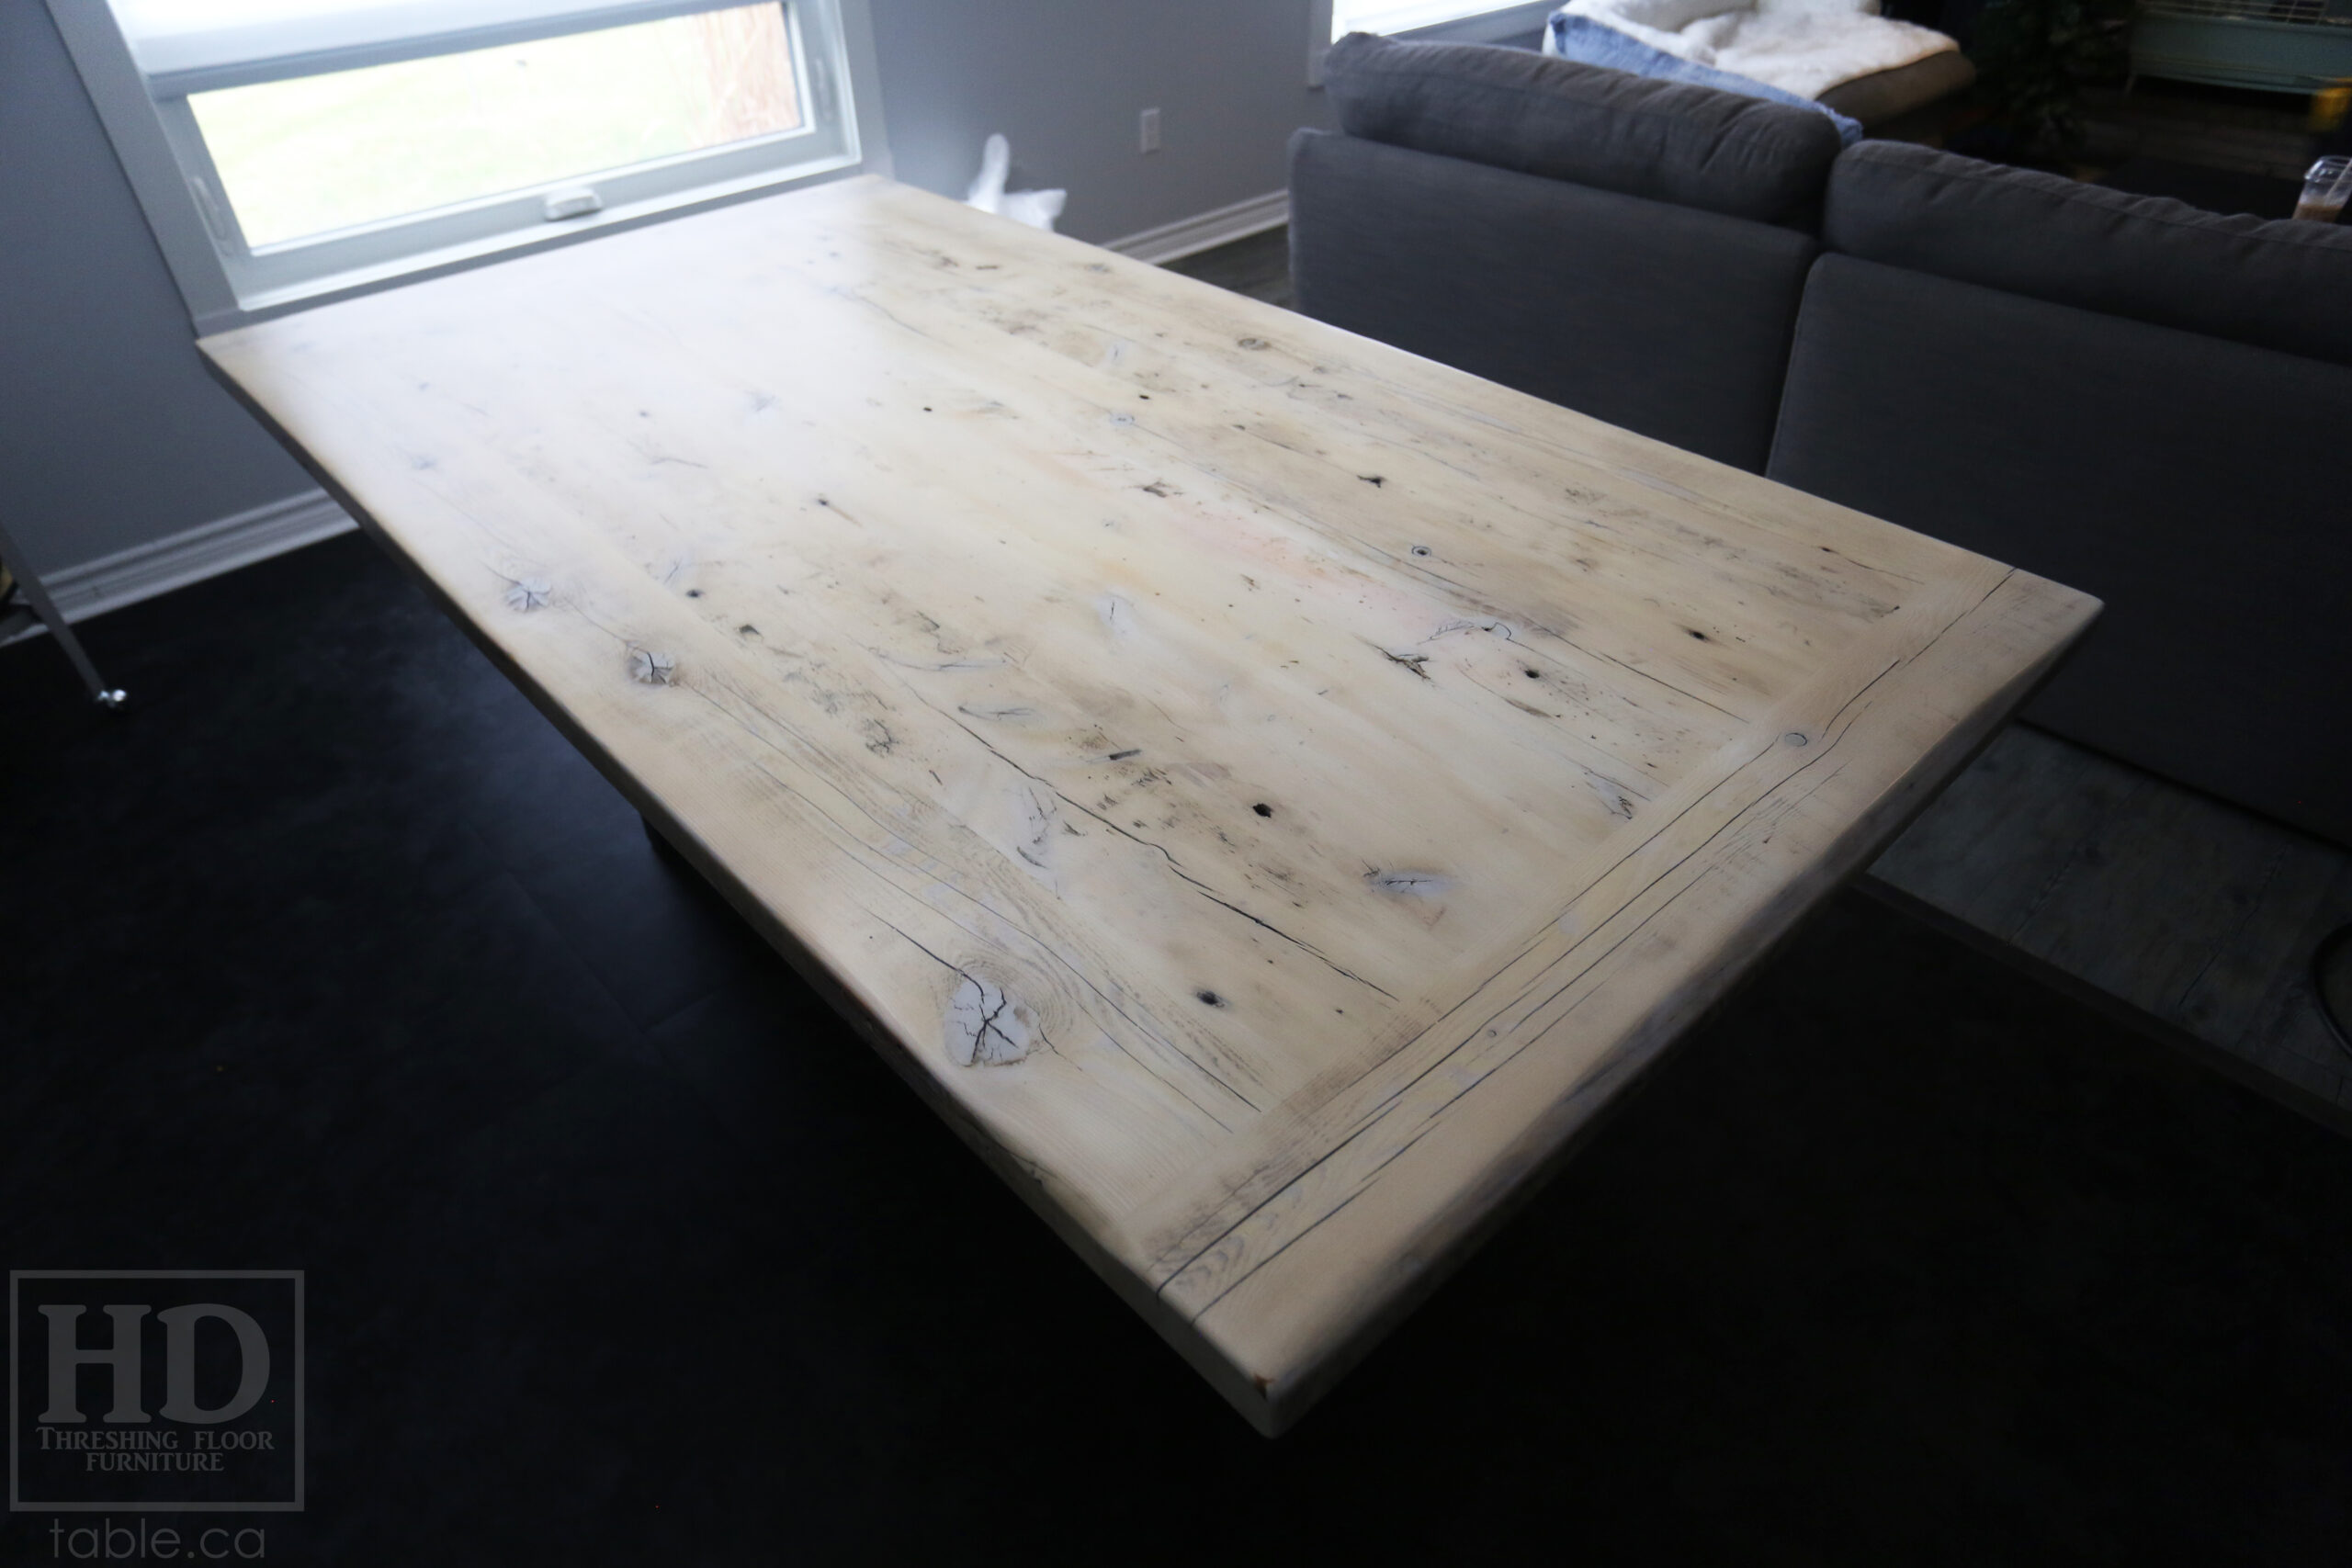 6.5' Ontario Barnwood Table we made for a Brantford Home - 42" wide - Modern Plank Posts Base - Old Growth Hemlock Threshing Floor Construction - Original edges & distressing maintained - Bleached Option - Premium epoxy + satin polyurethane finish - www.table.ca